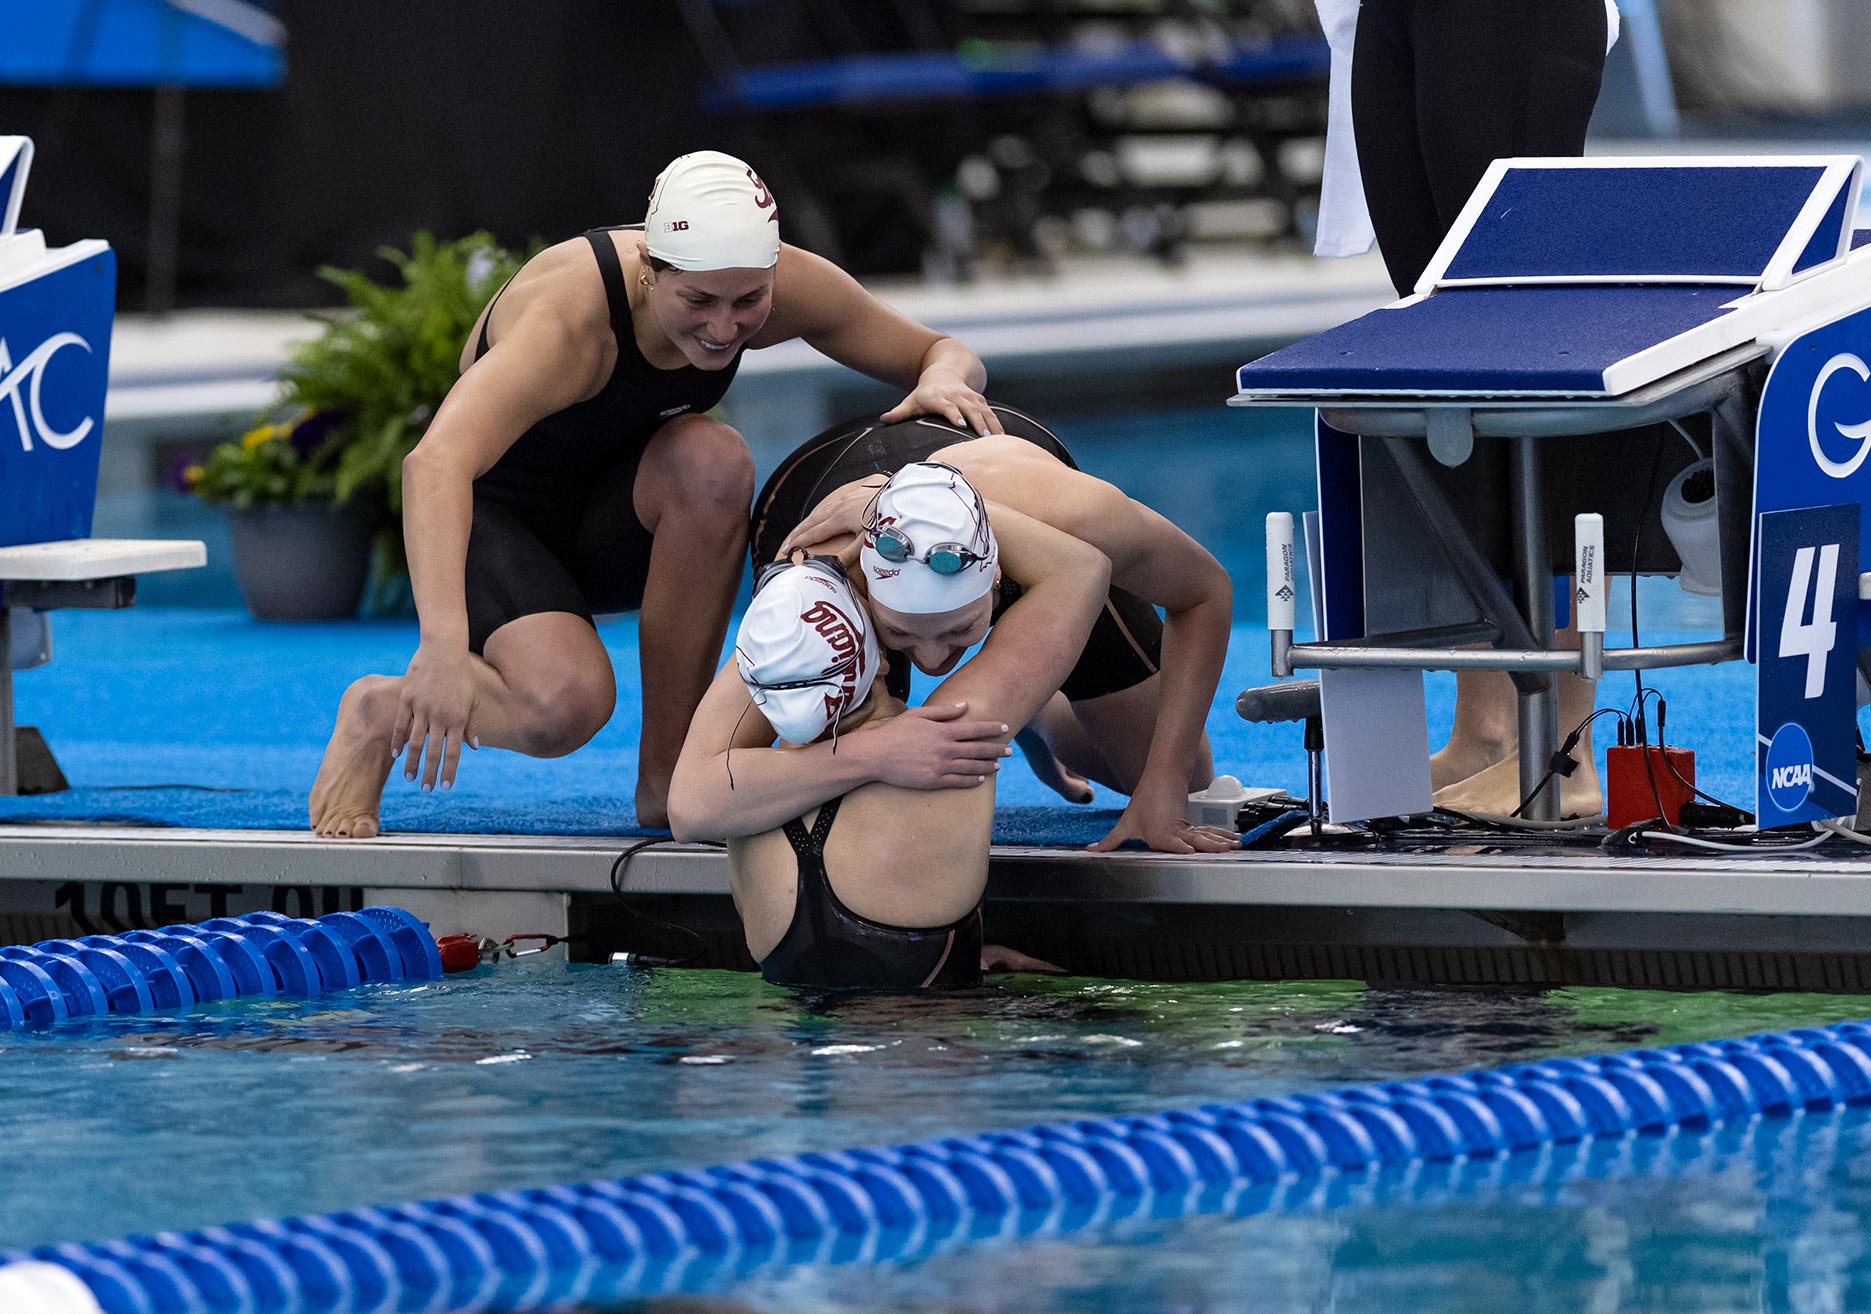 PHOTO VAULT Day 1 of 2021 Women's NCAA Swimming & Diving Championships